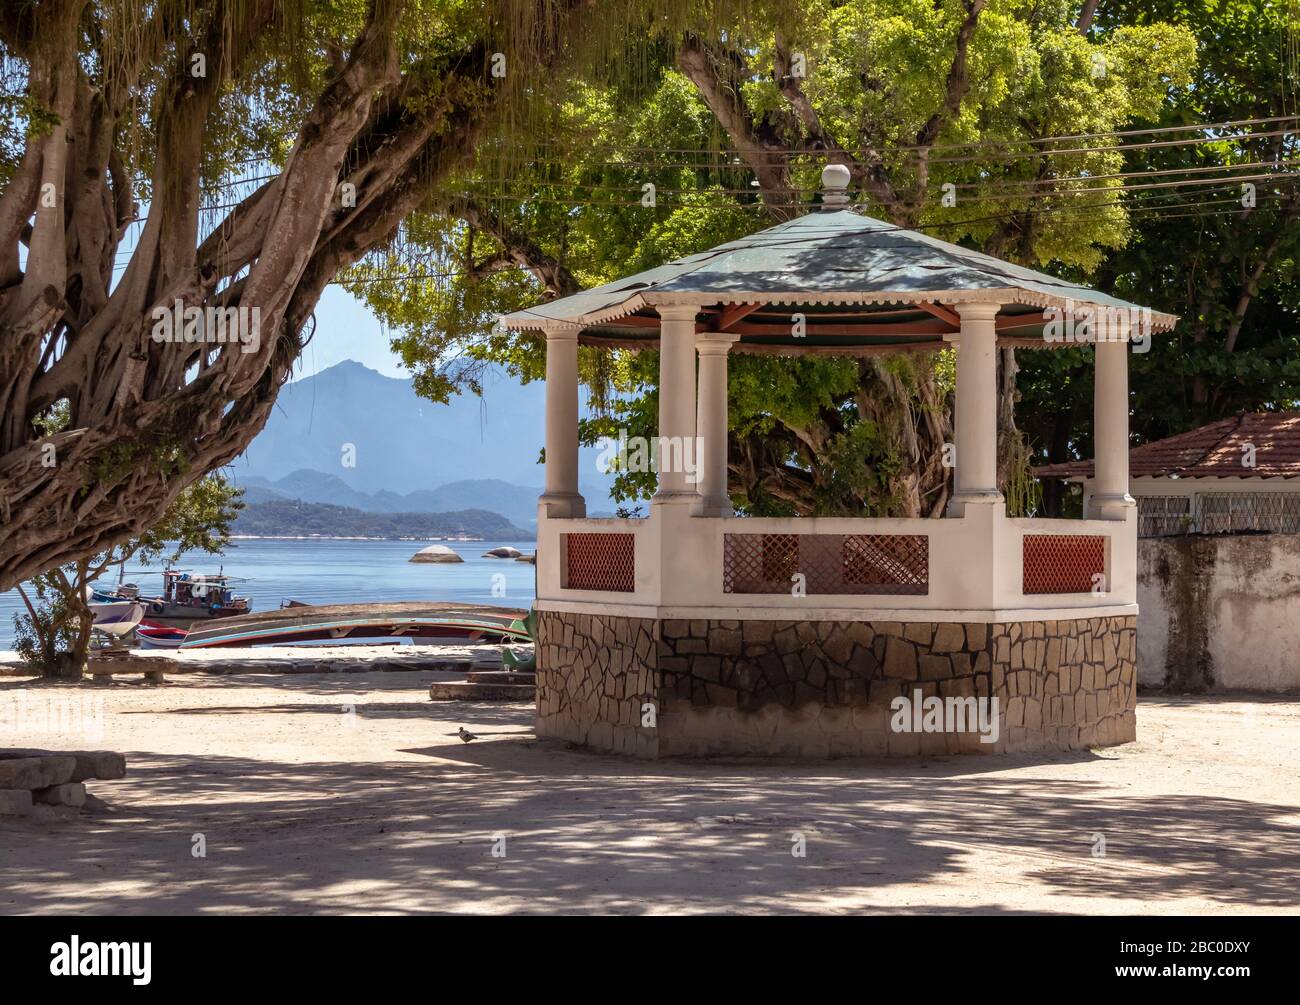 Bandstand, typical construction of small towns and villages, where civic events are held, Paqueta Island, Rio de Janeiro, Brazil Stock Photo